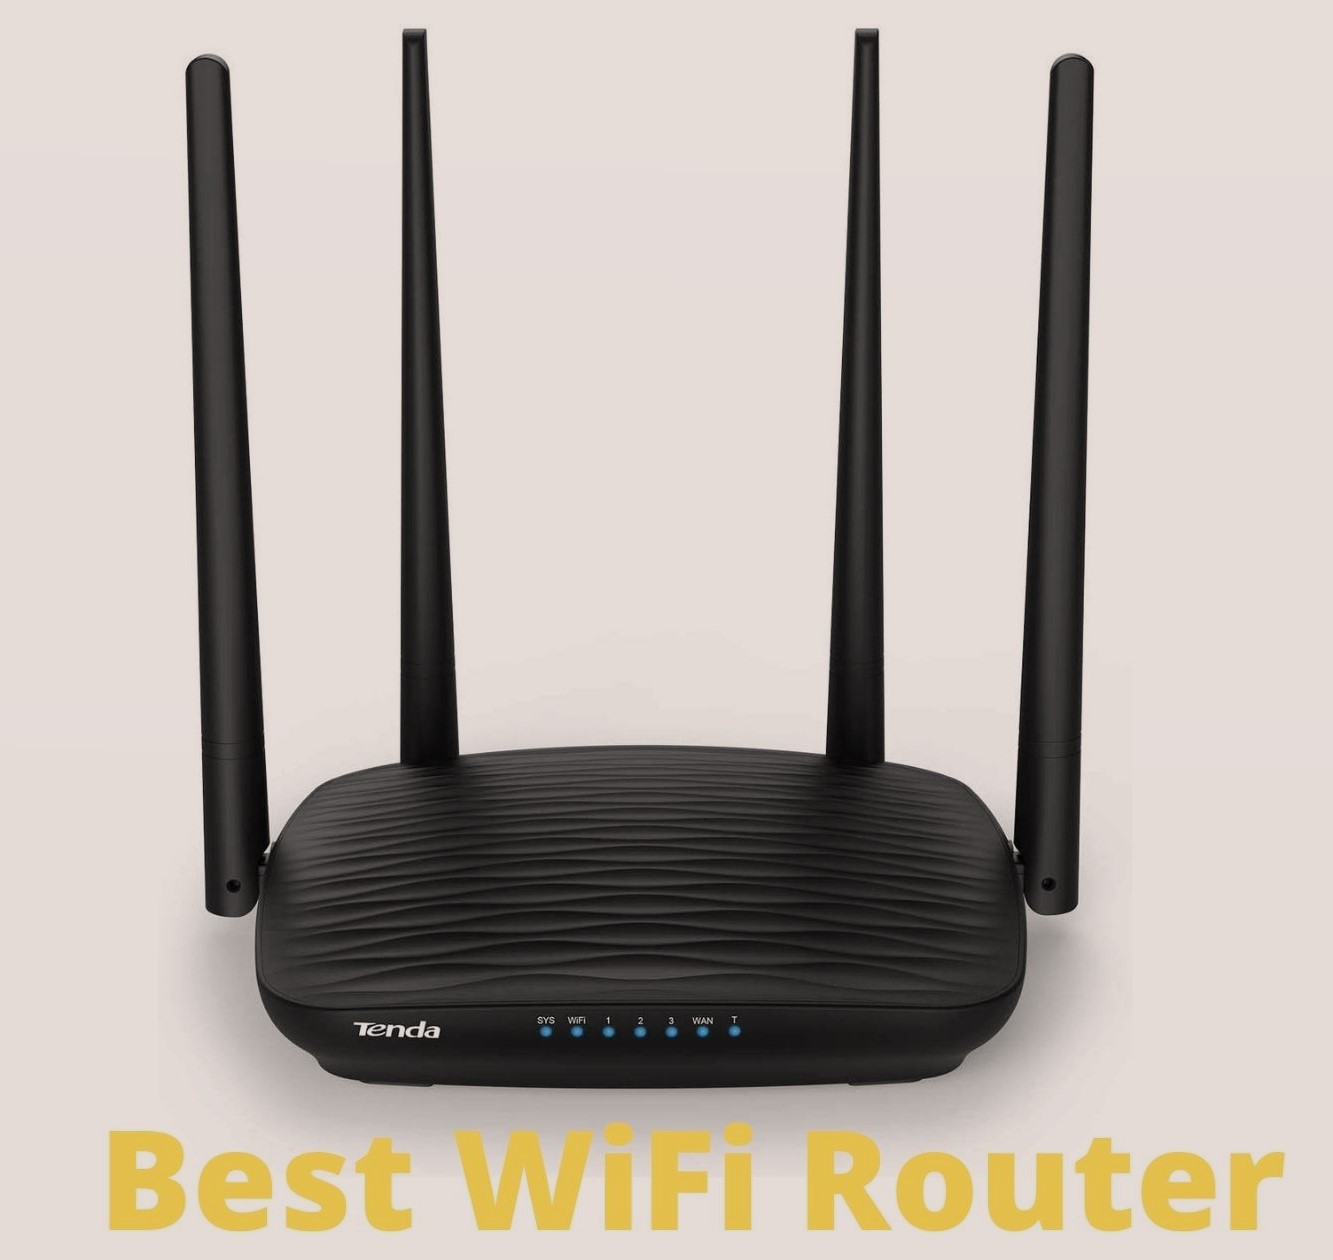 Best WiFi Router Under Rs. 2000 in India 2020